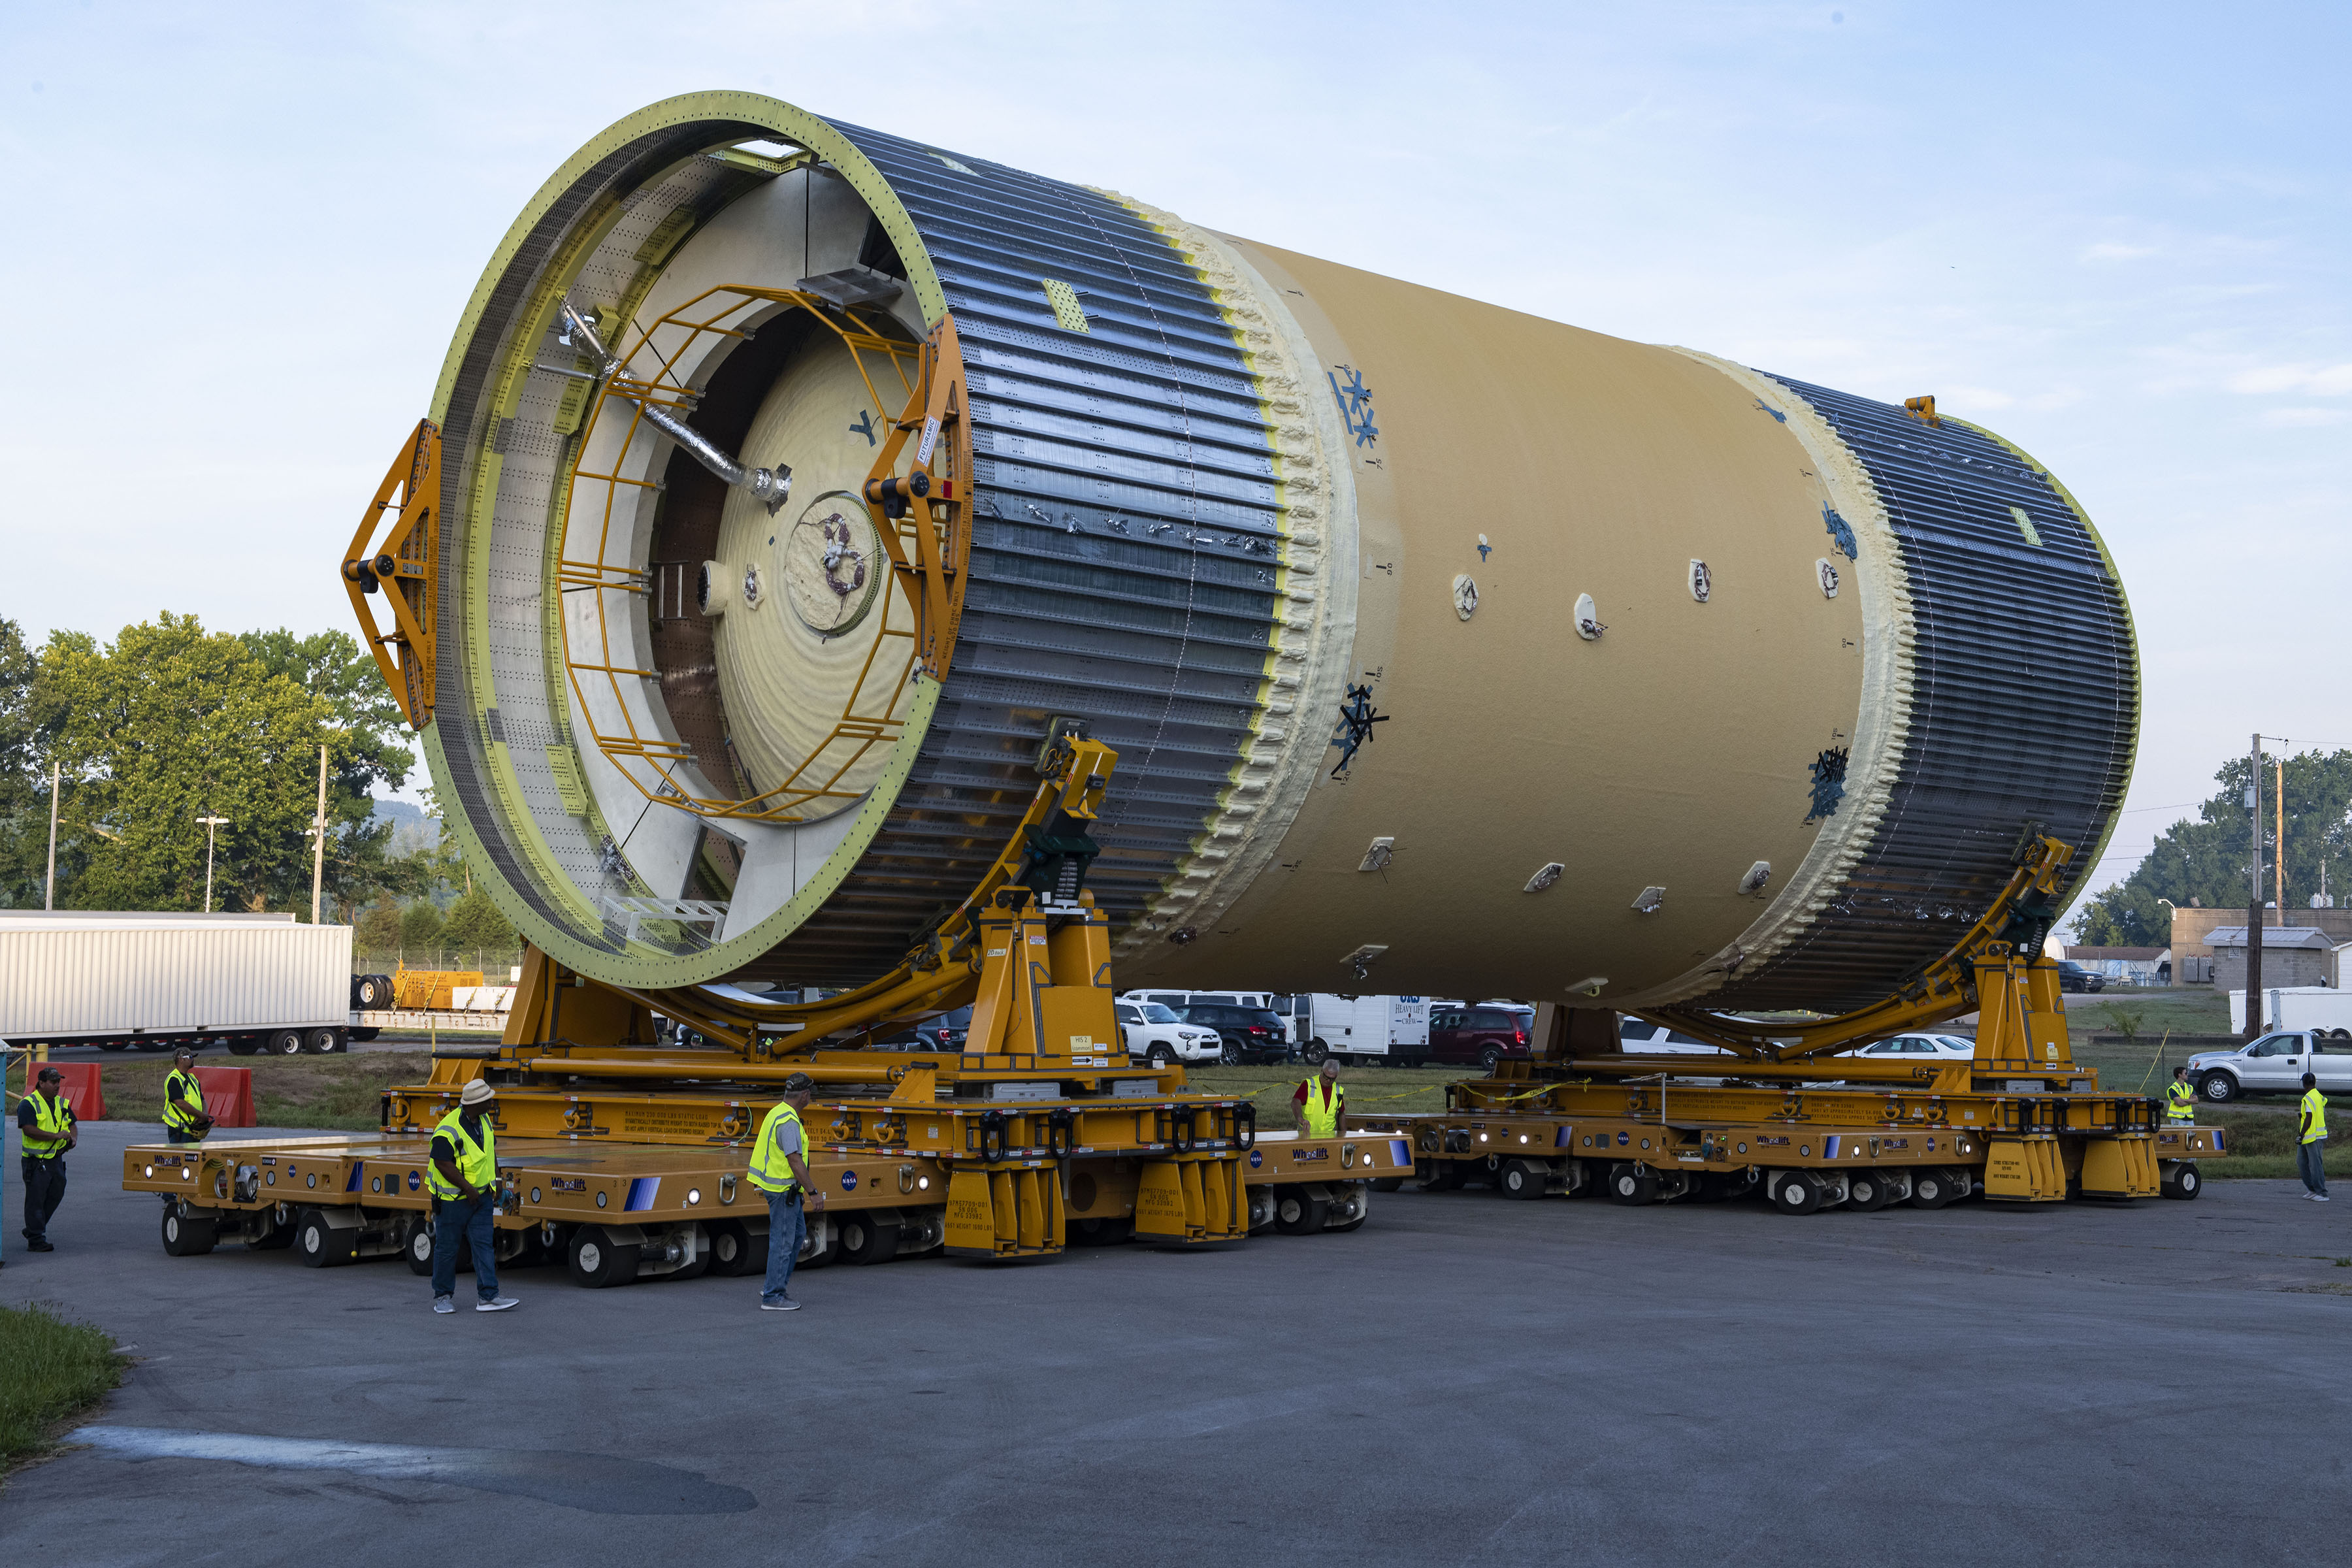 The fourth and final structural test article for NASA’s Space Launch System (SLS) core stage was unloaded from the barge Pegasus